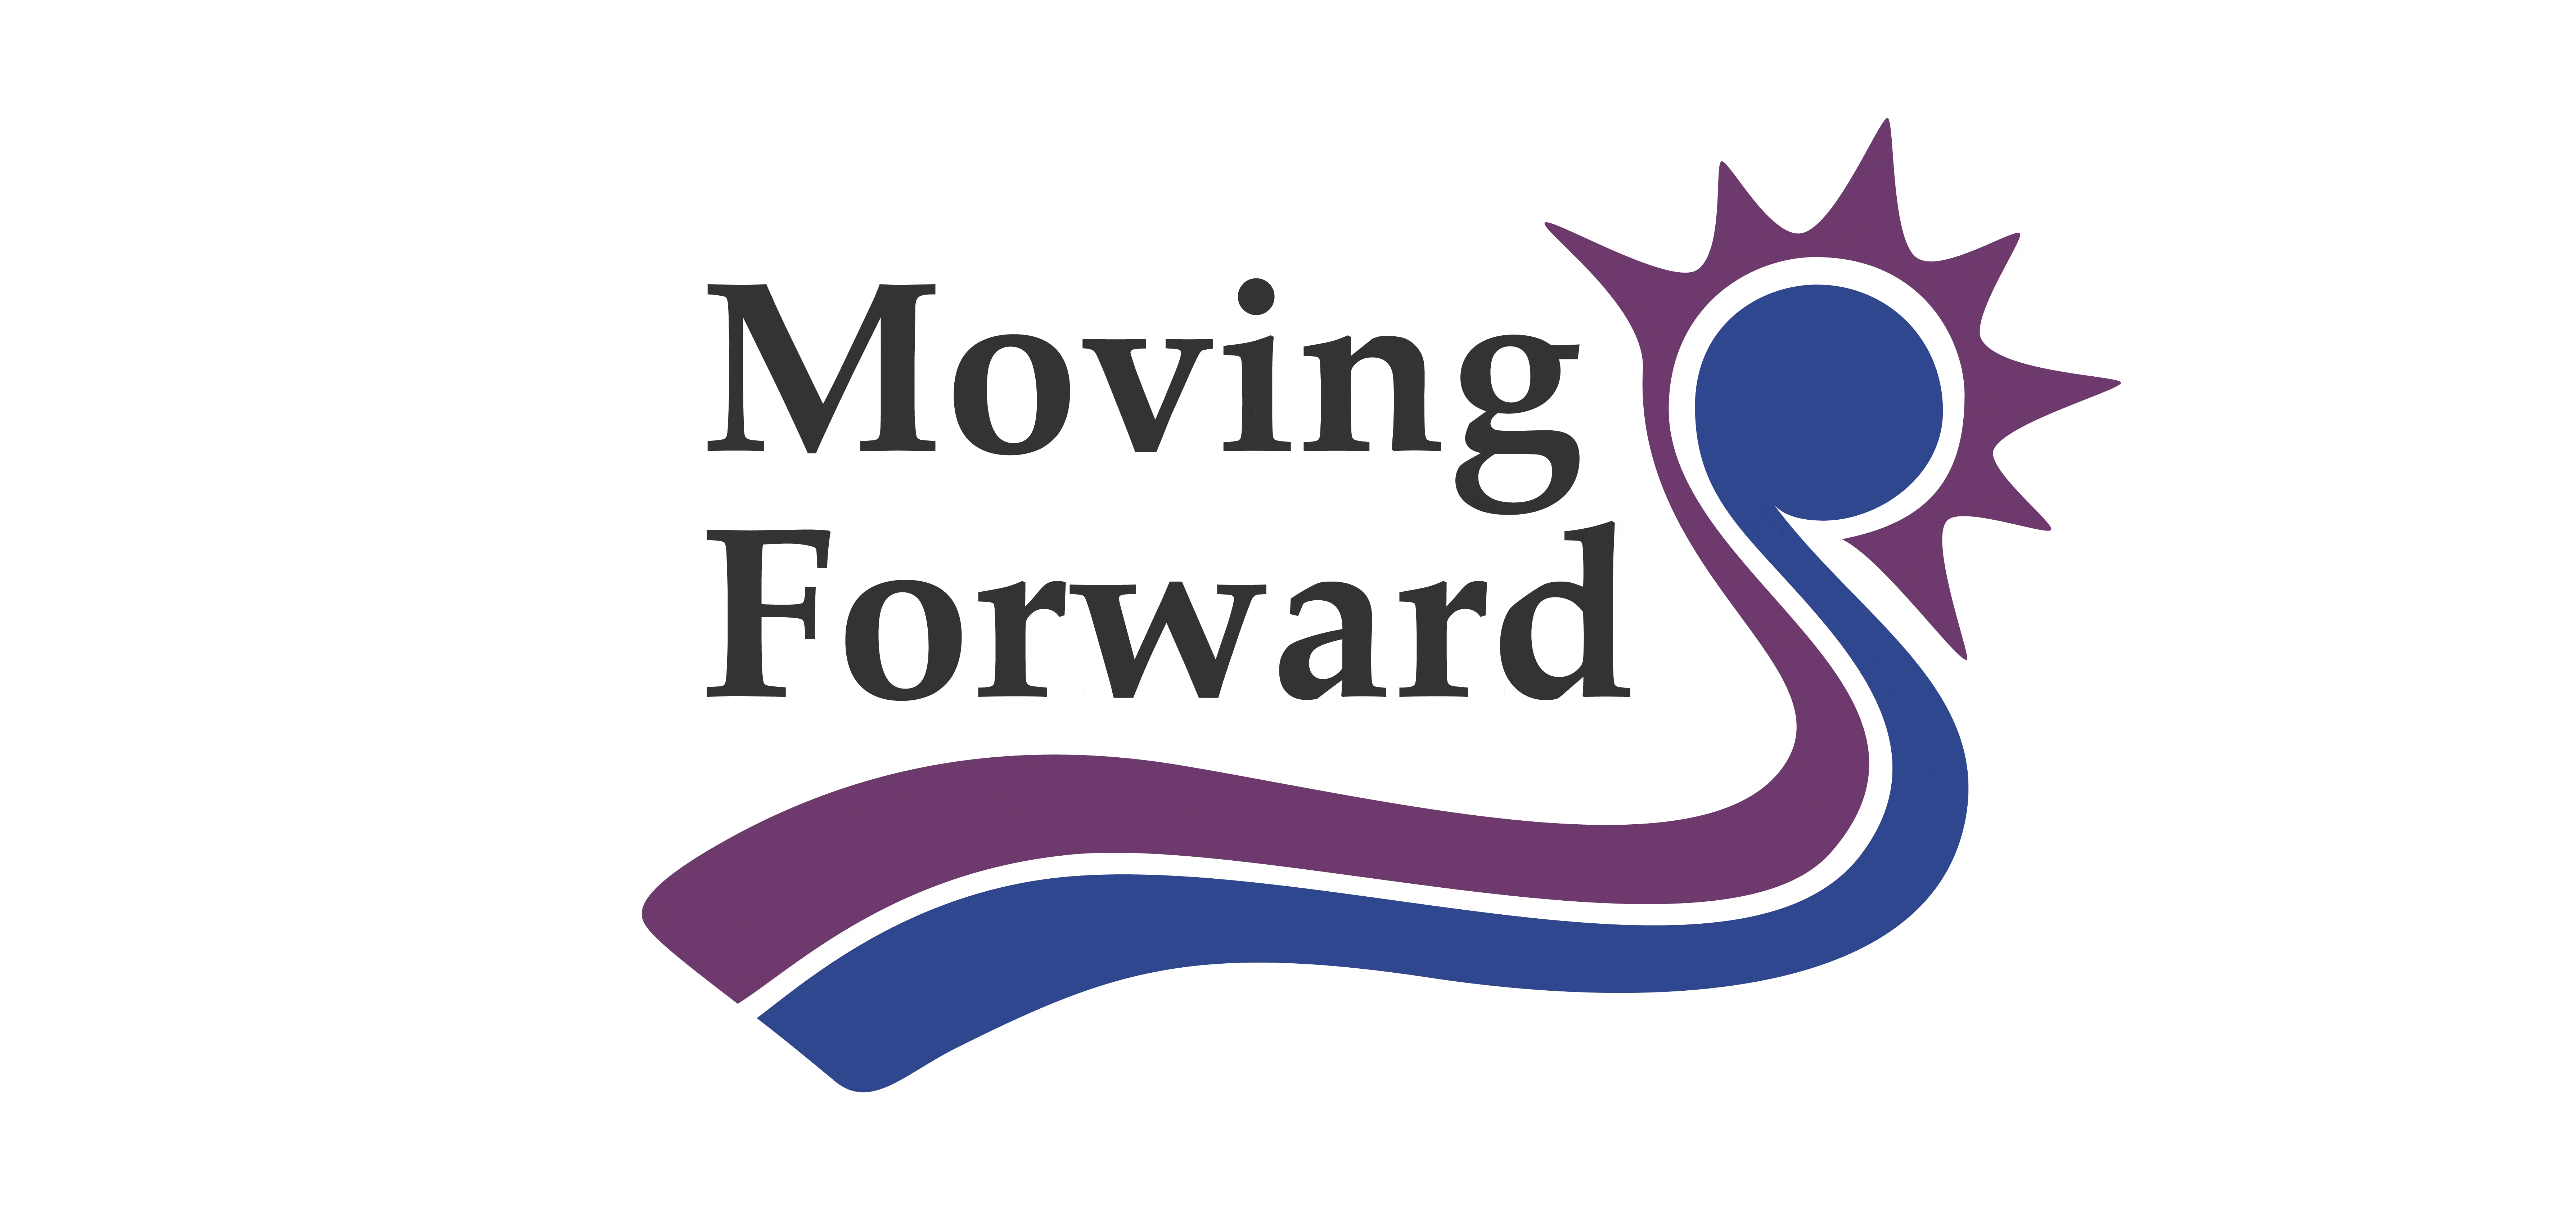 Cindy-Mclung-Moving-Forward